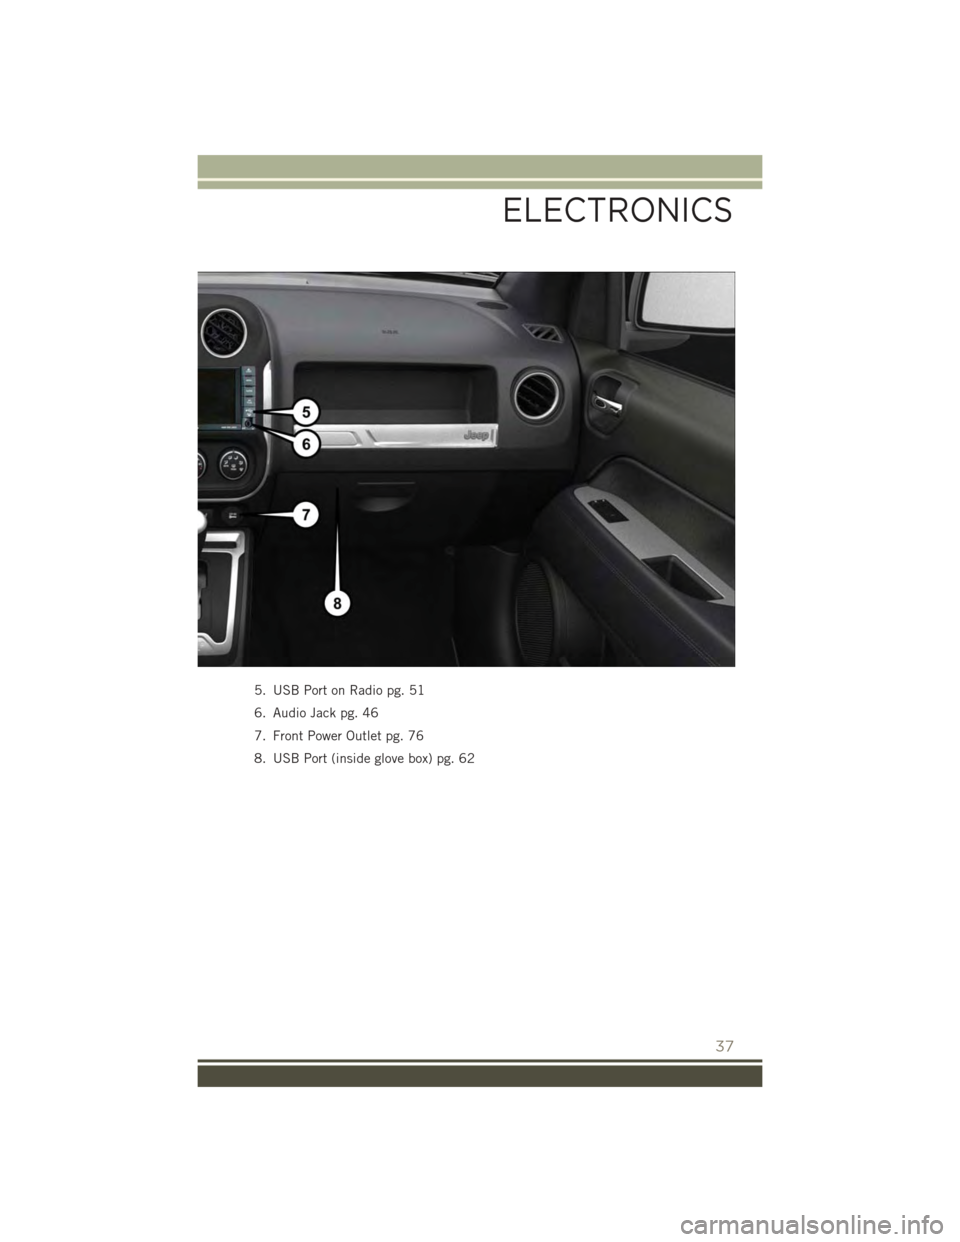 JEEP PATRIOT 2015 1.G Owners Guide 5. USB Port on Radio pg. 51
6. Audio Jack pg. 46
7. Front Power Outlet pg. 76
8. USB Port (inside glove box) pg. 62
ELECTRONICS
37 